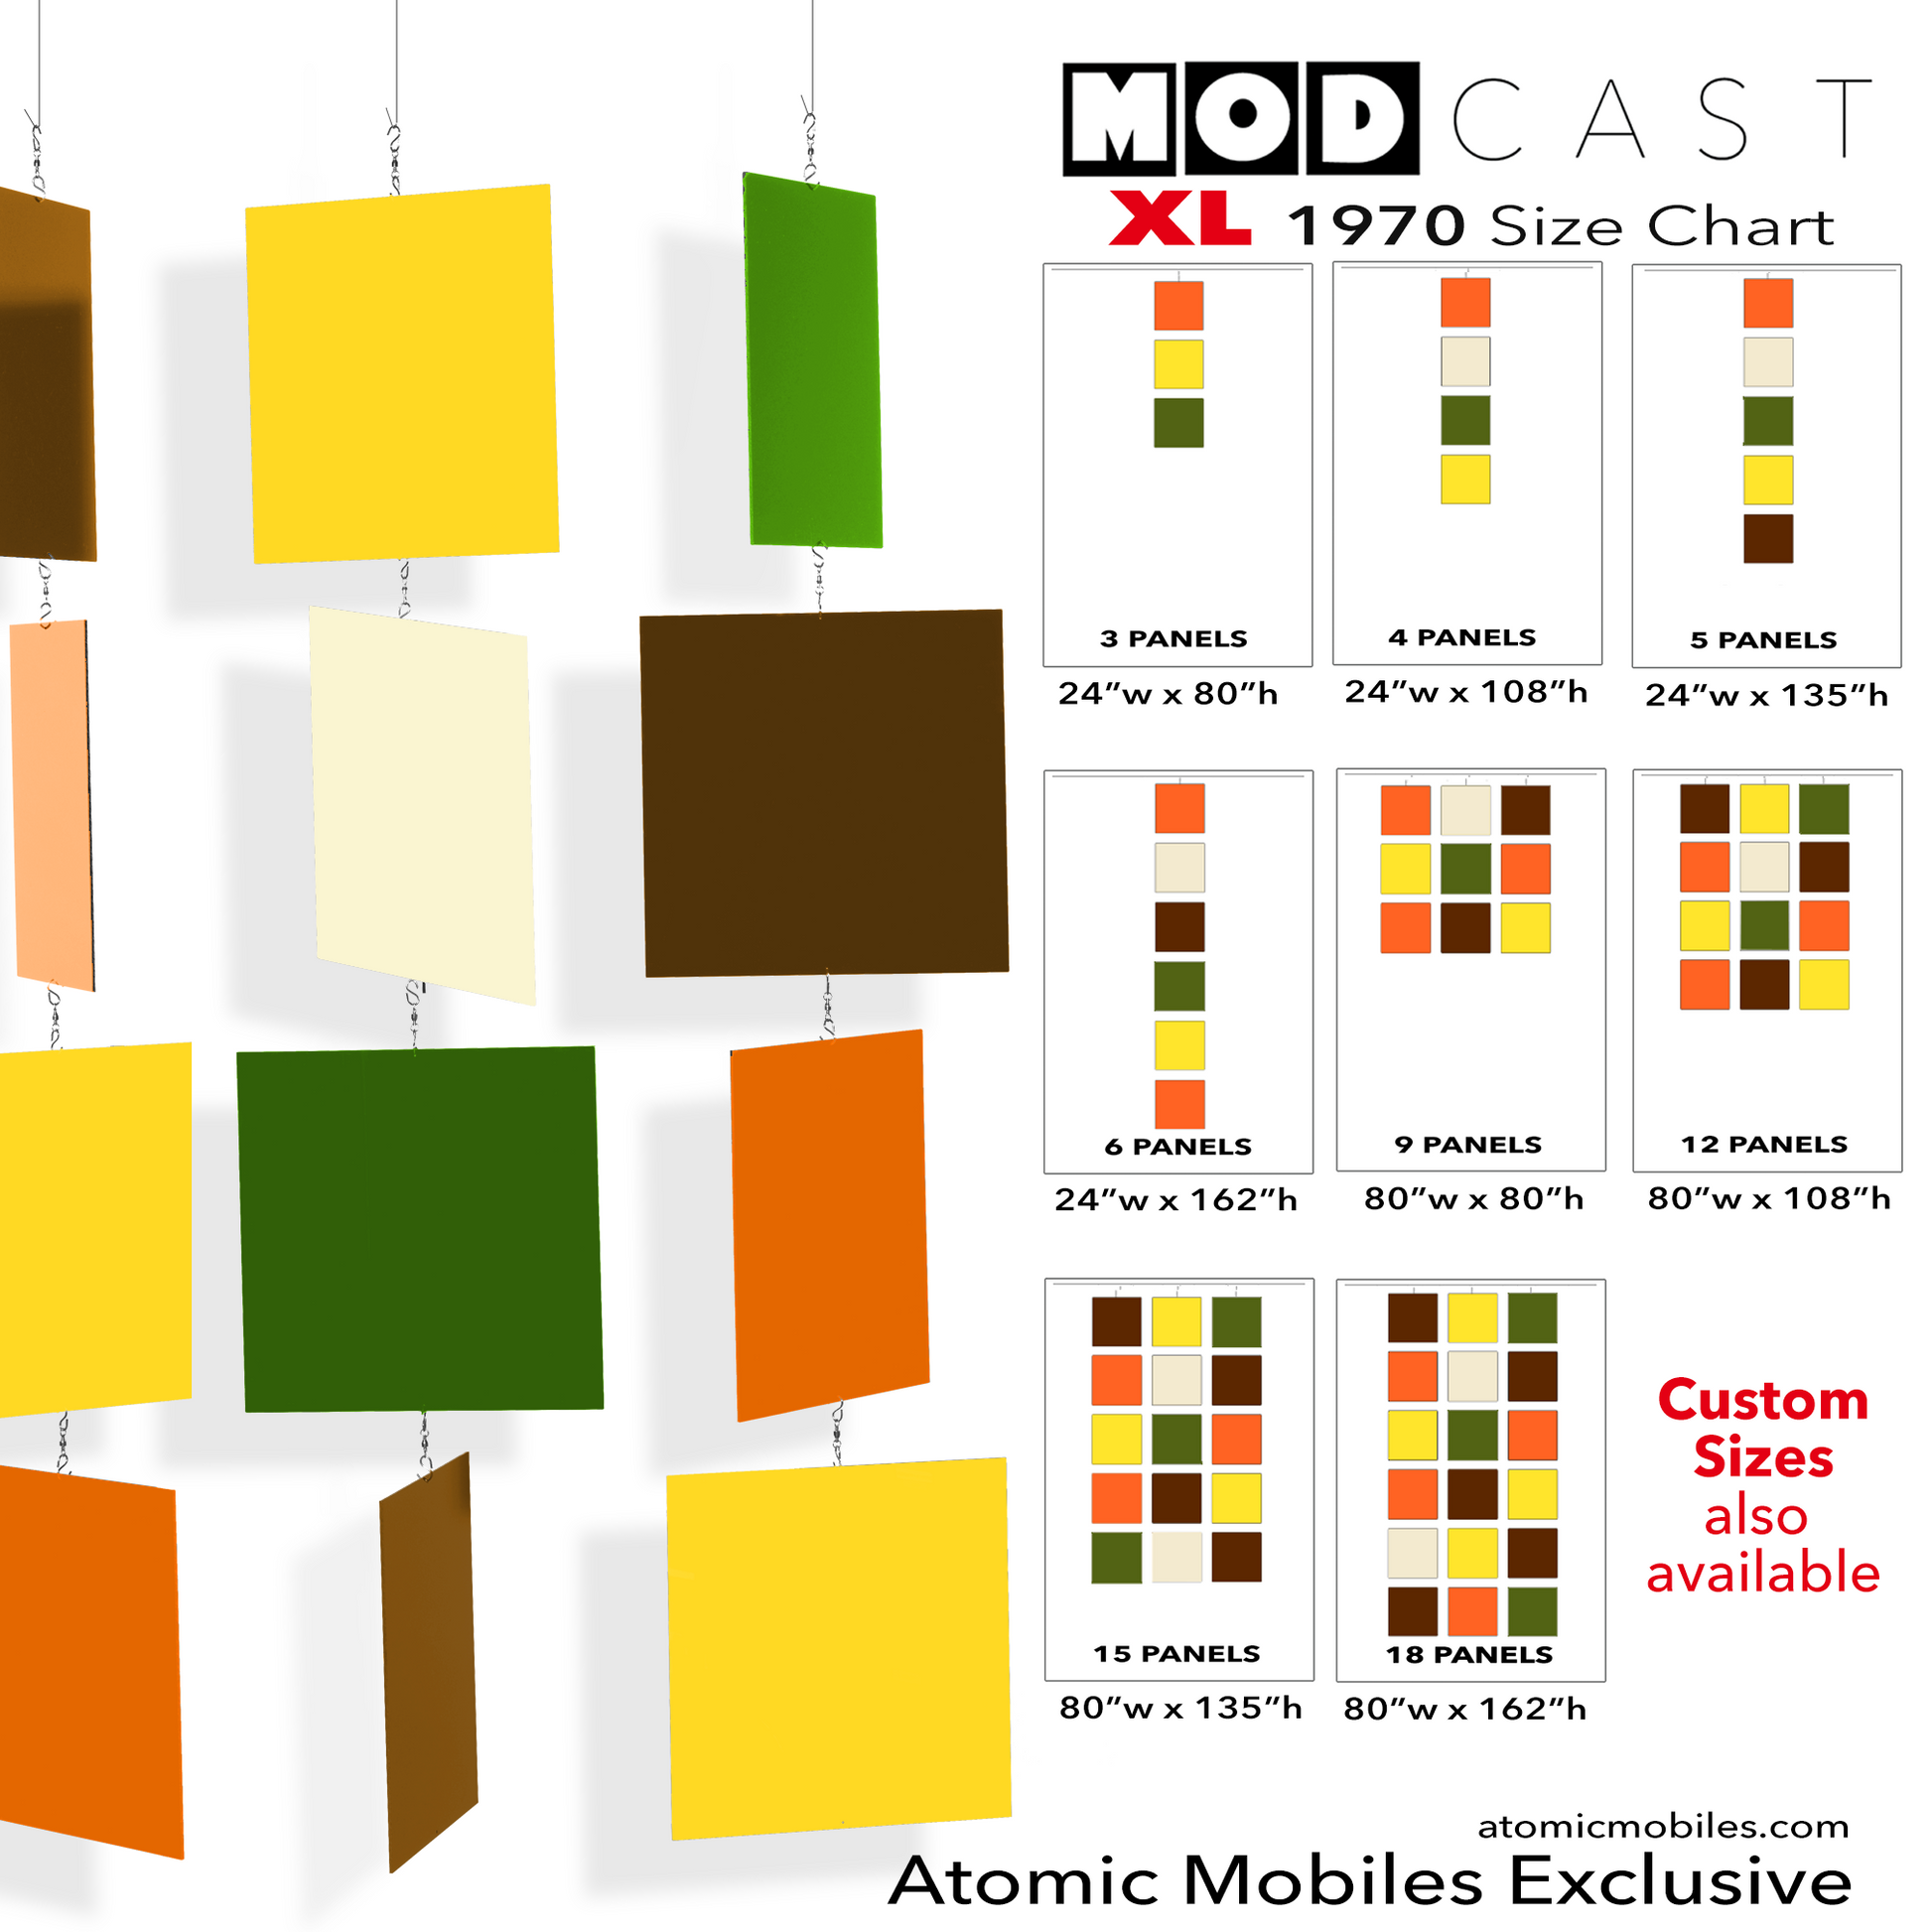 Size Chart for 1970 MODcast XL Architectural Hanging Art Mobiles in Yellow, Olive Green, Brown, Cream, and Orange - mid century modern inspired hanging kinetic art mobiles by AtomicMobiles.com